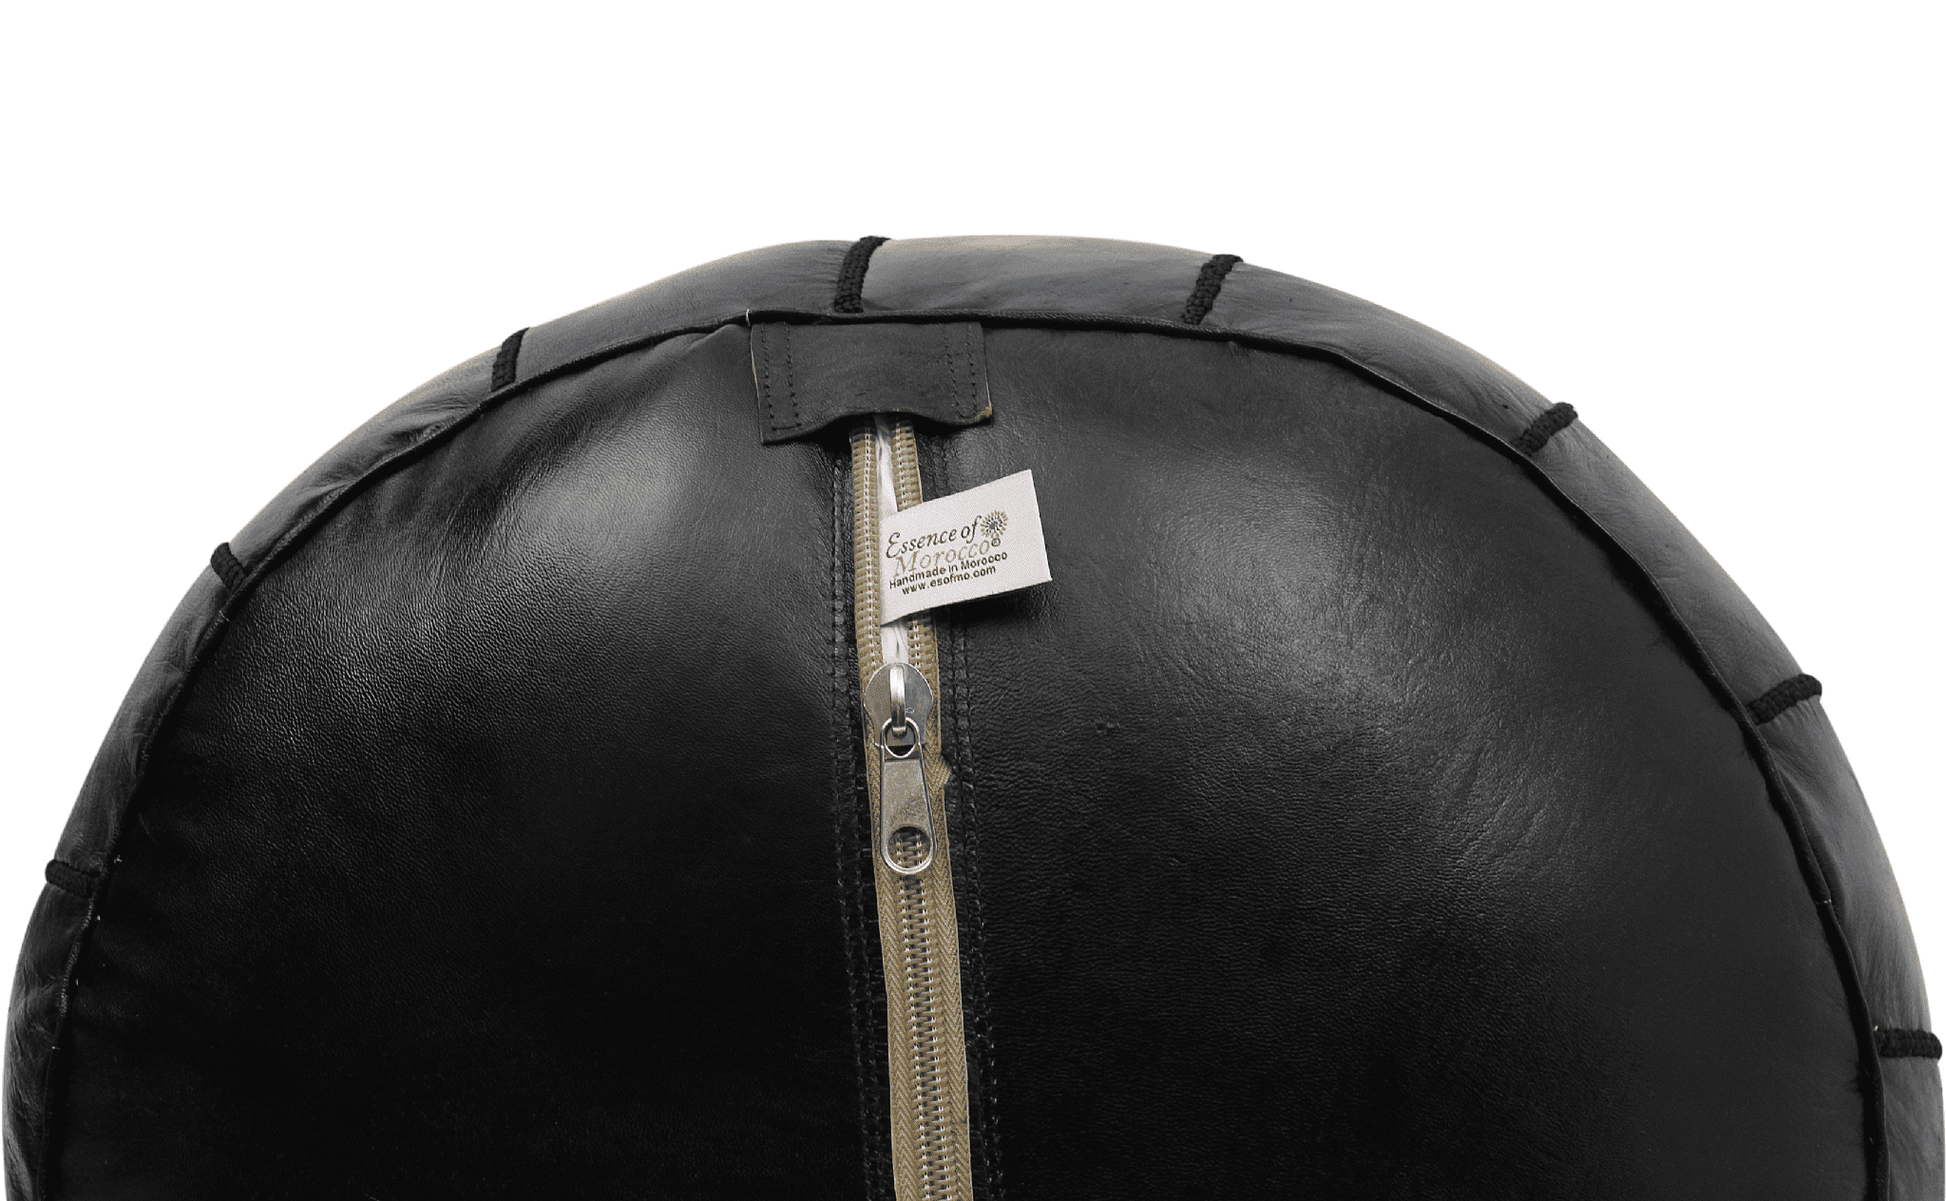 moroccan-black-pouffe-pouf-ottoman-footstool-cover-only-or-stuffed-real-leather